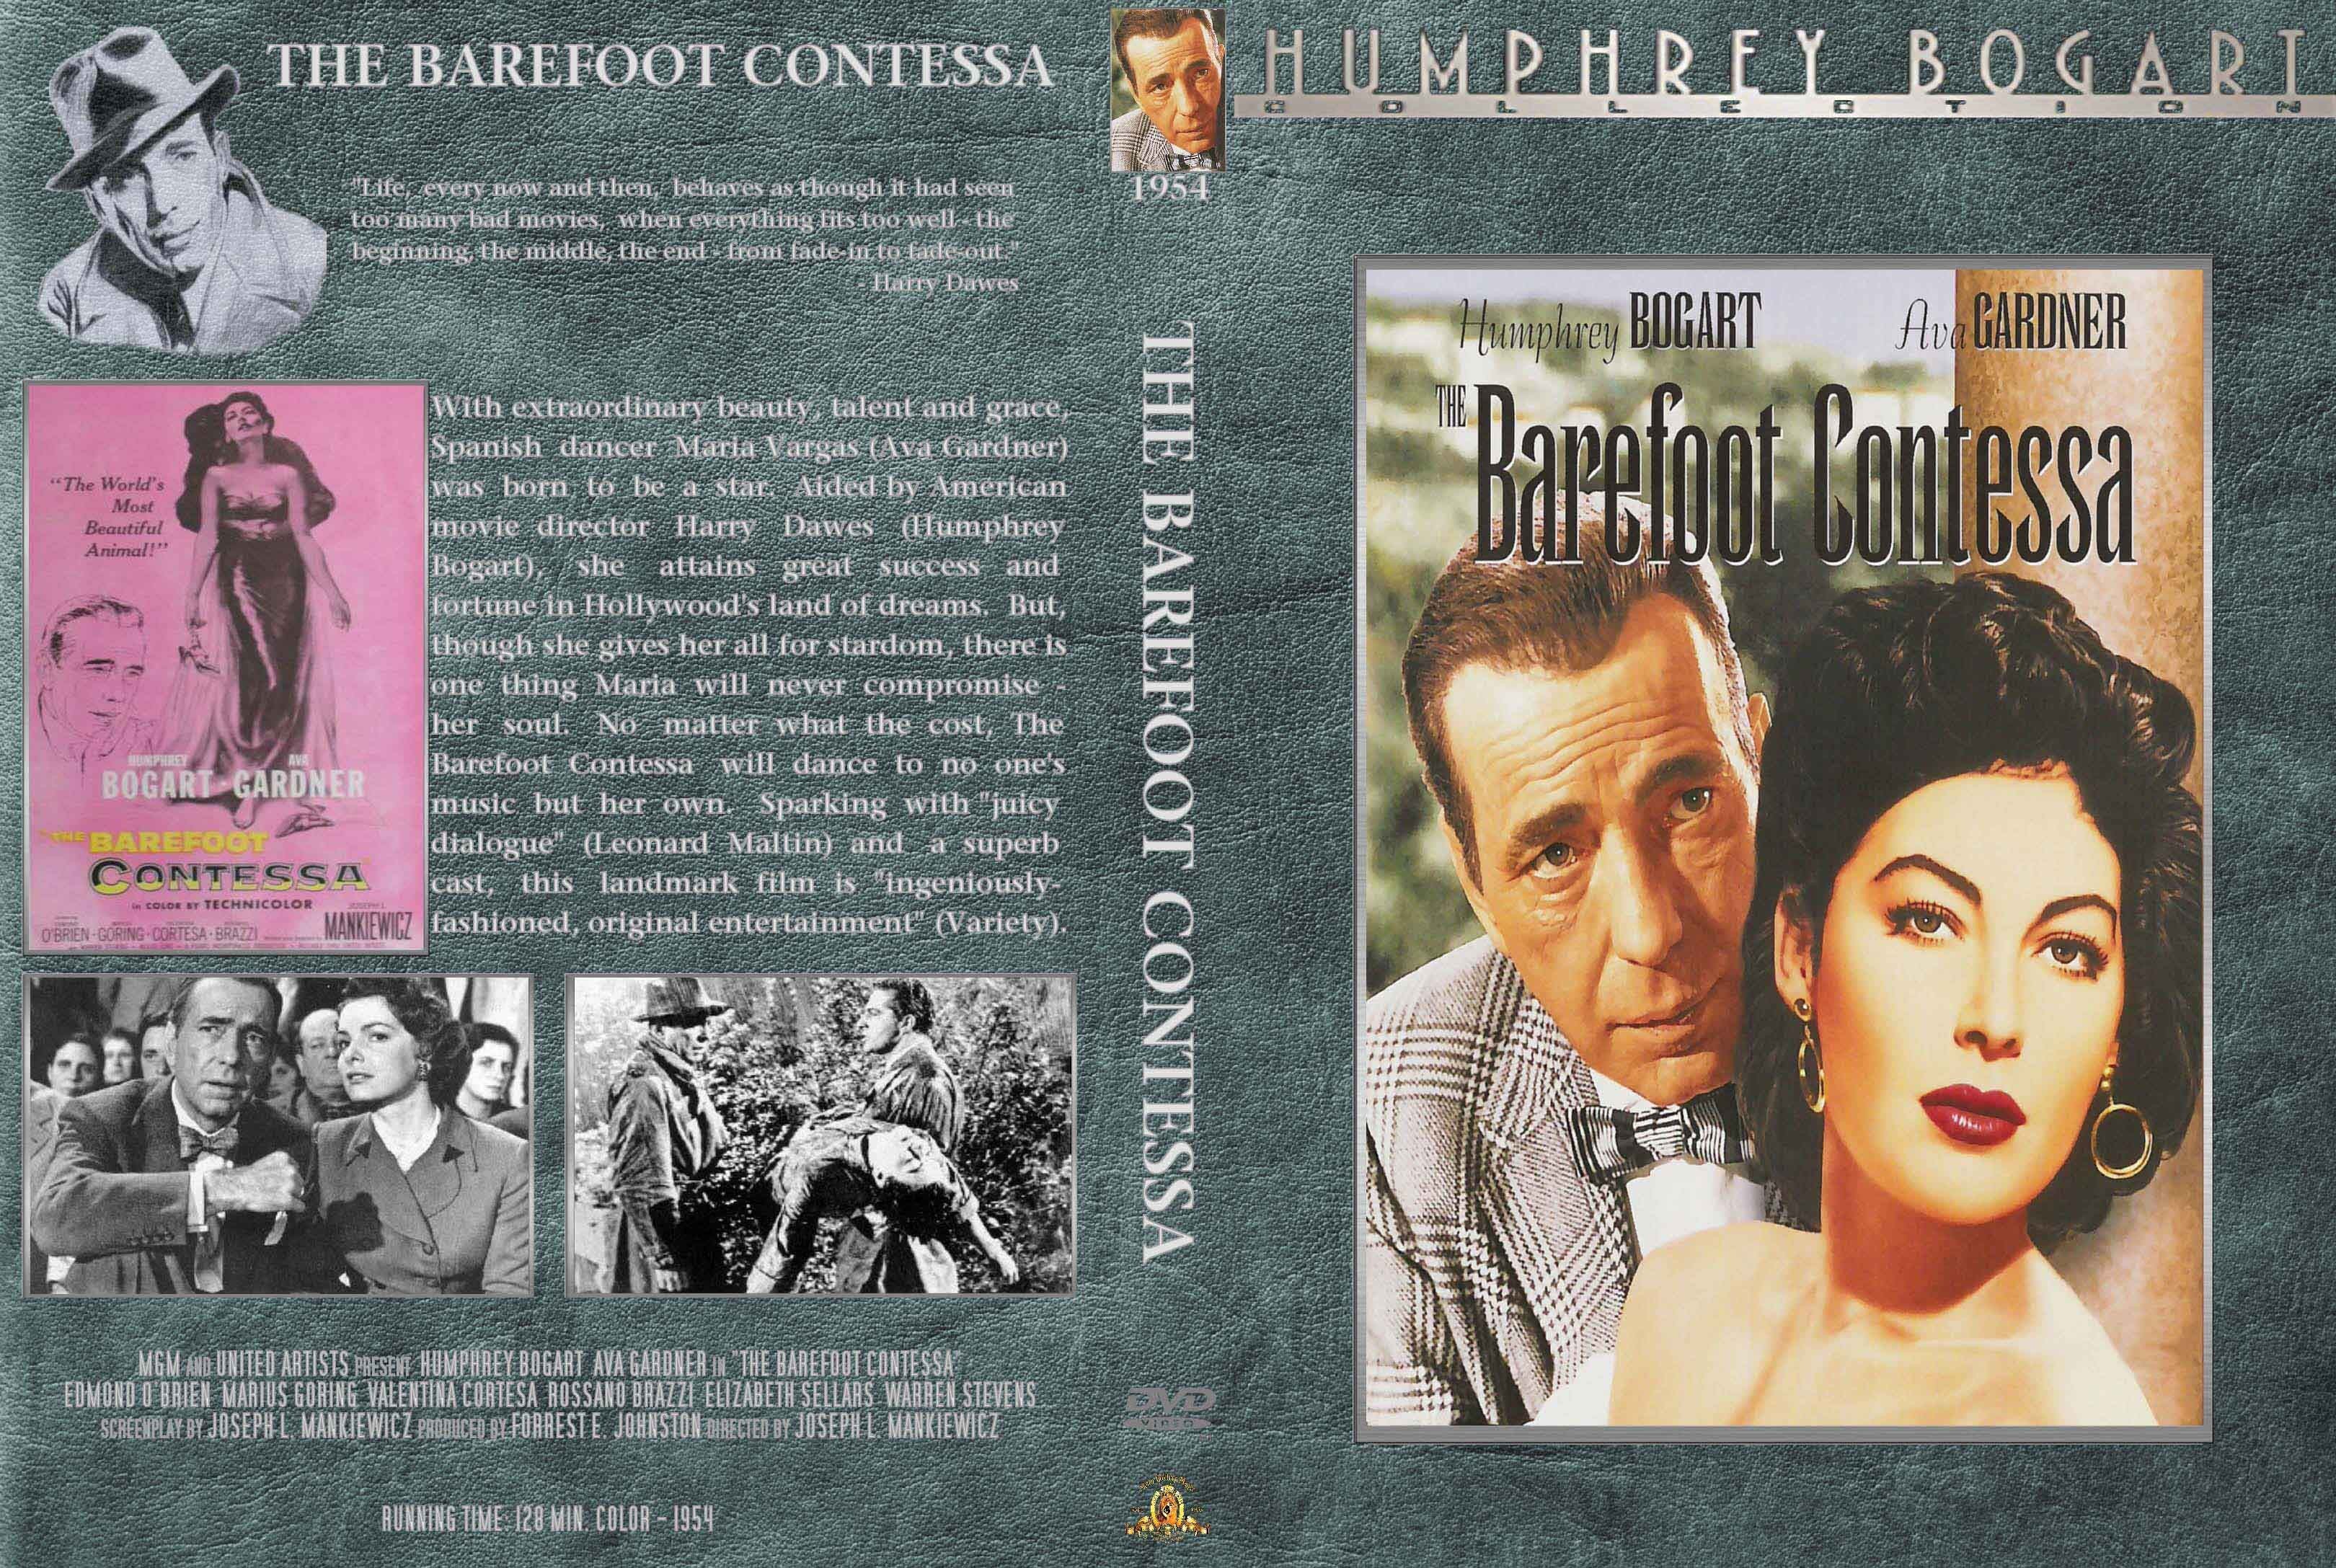 The Barefoot Contessa 1954 - front back.